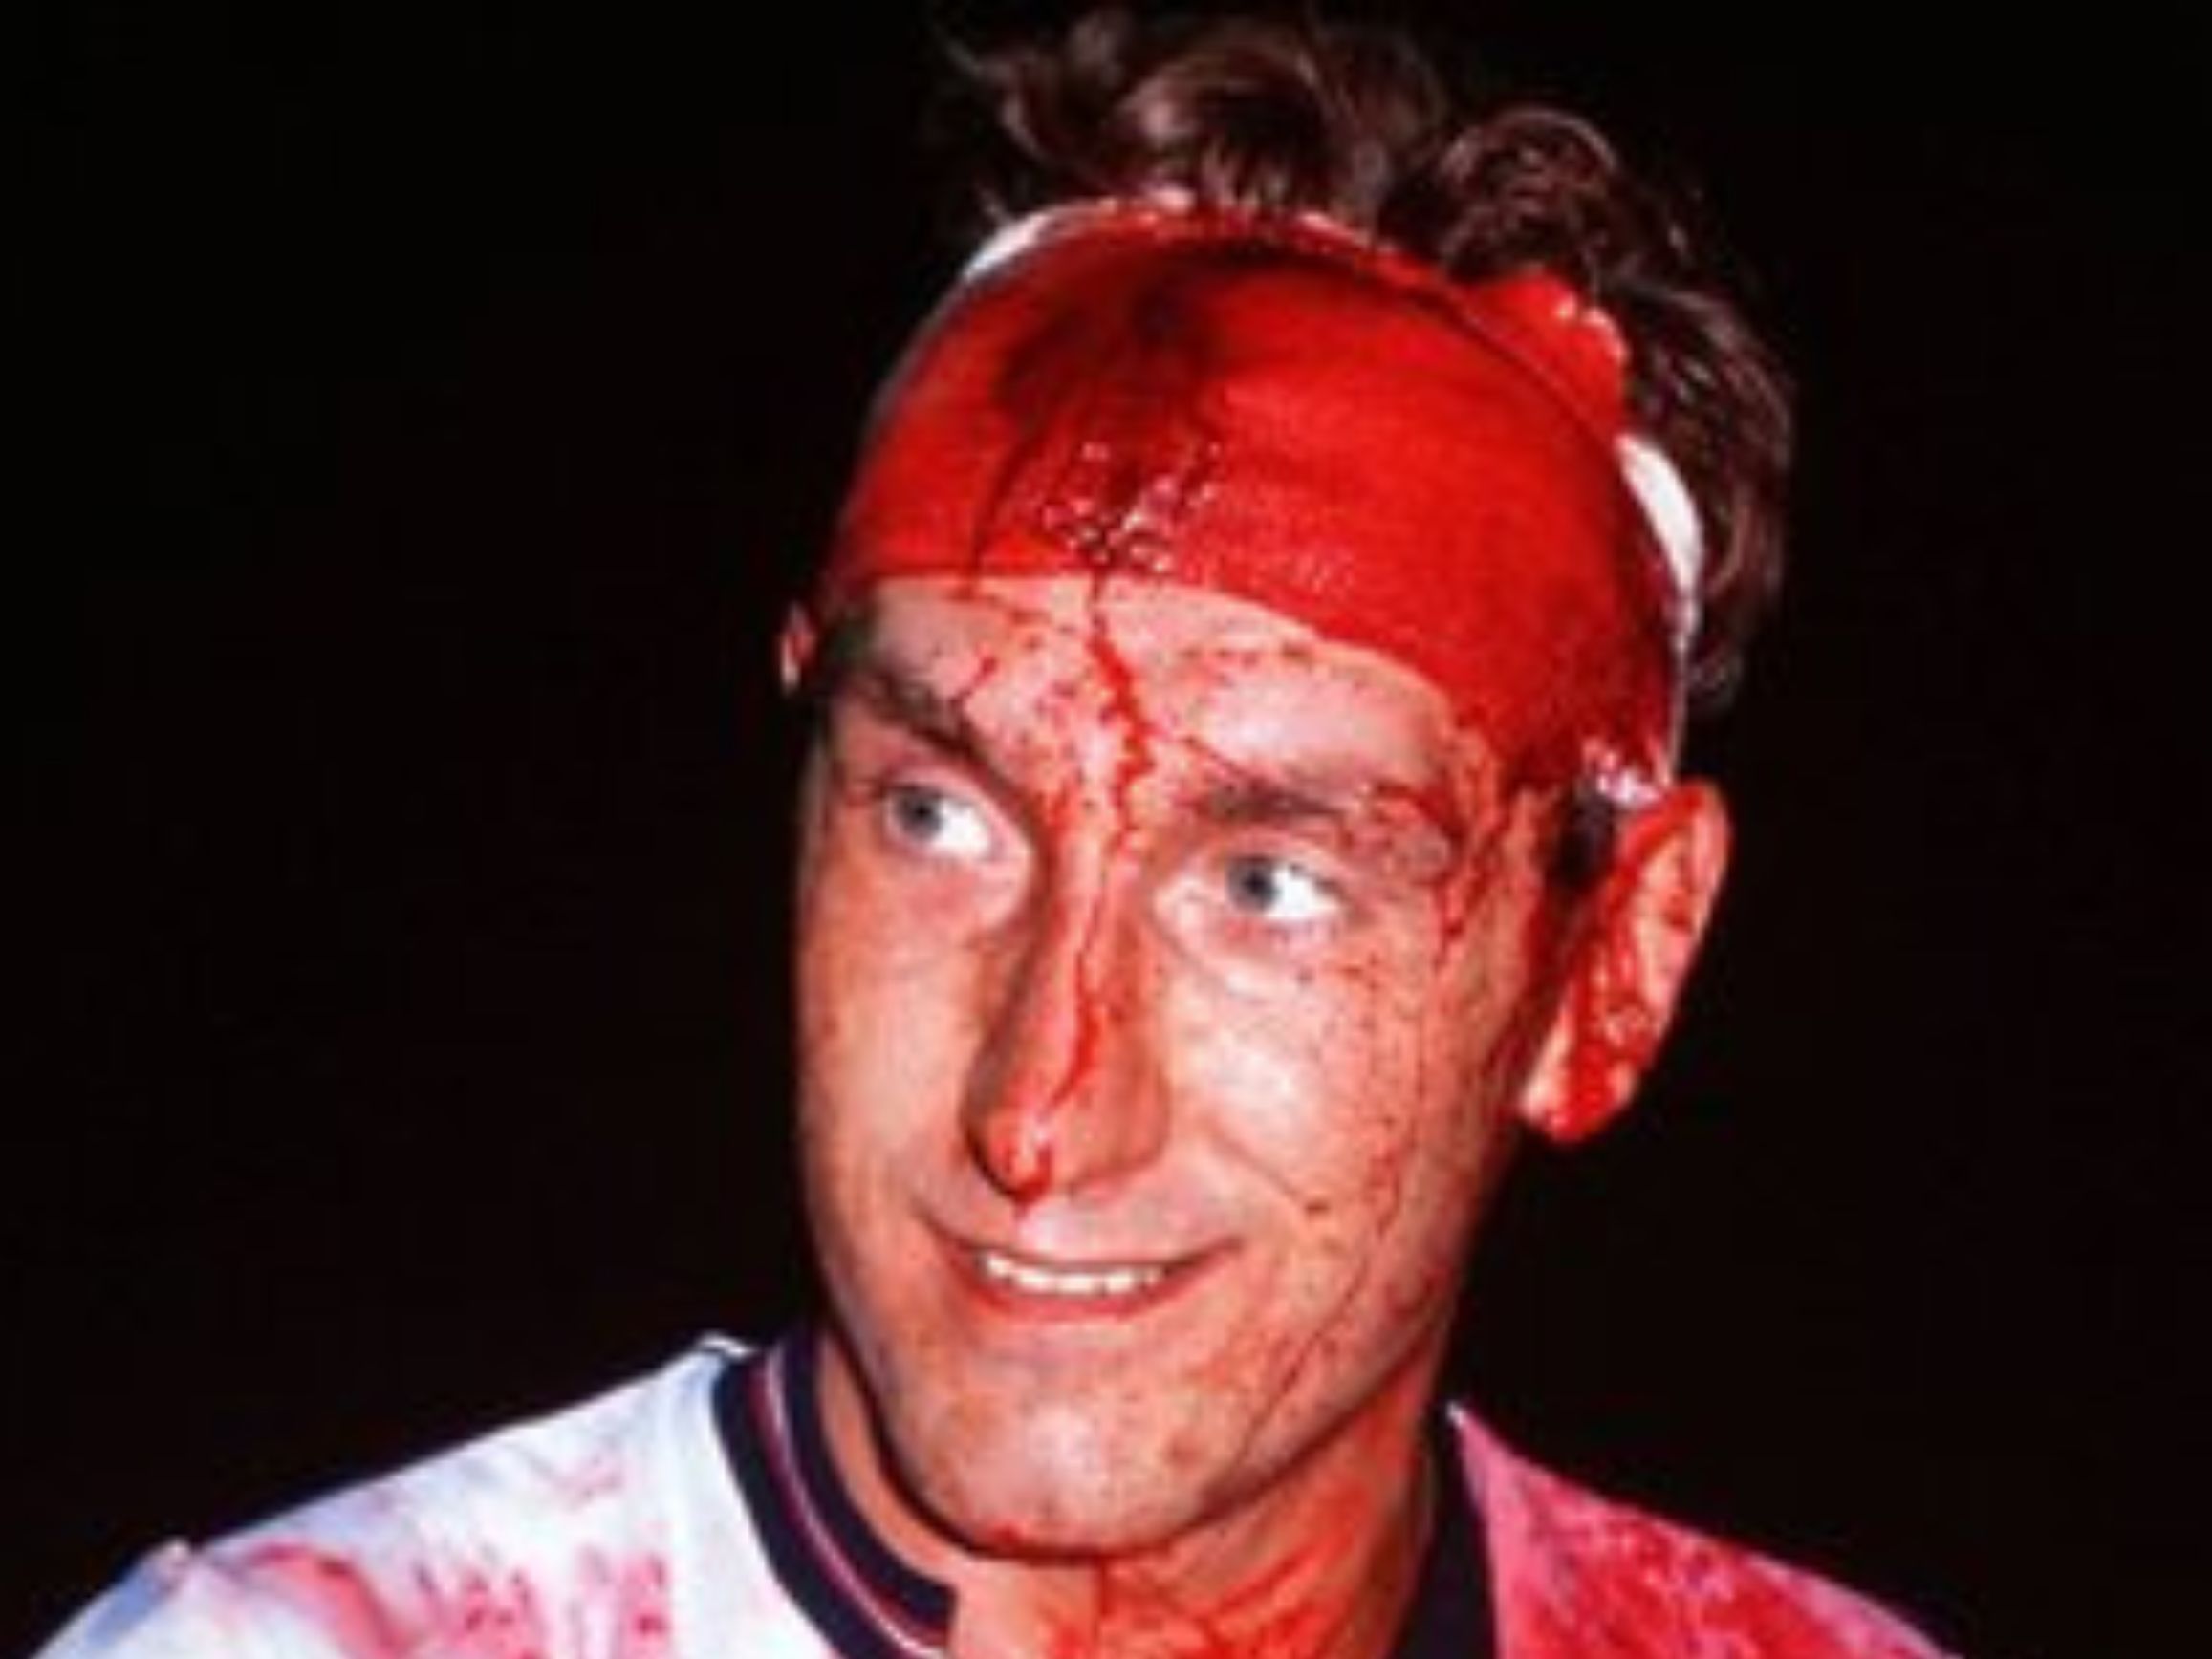 Ipswich Town Fan Nails Terry Butcher’s Iconic Bloodshed Moment for Halloween